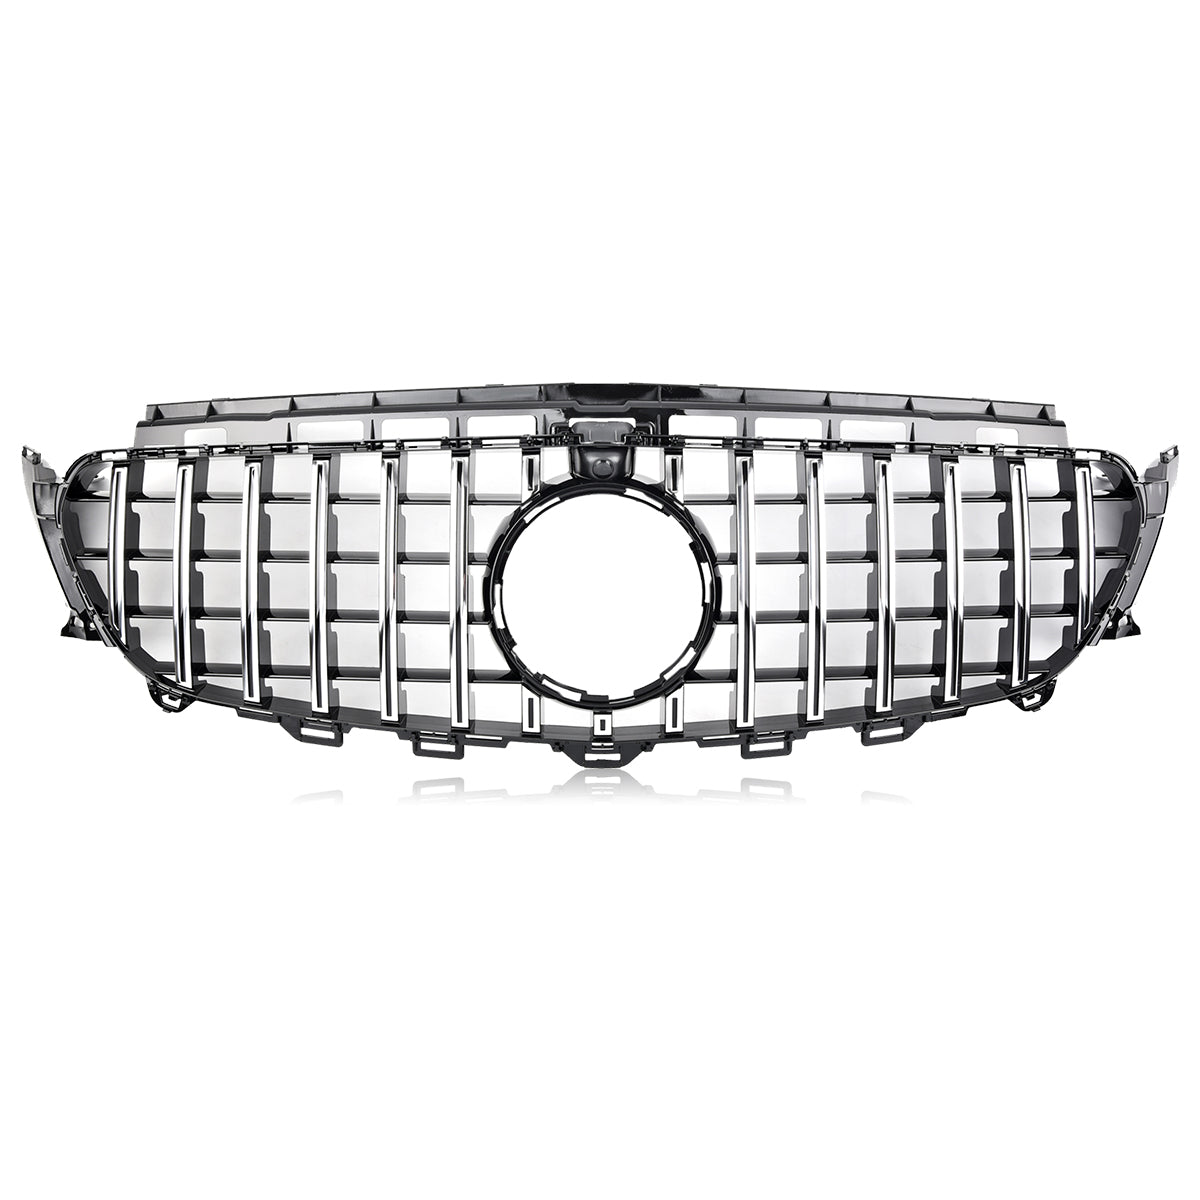 GT STYLE GRILLE FOR E-CLASS W213 2016-2018